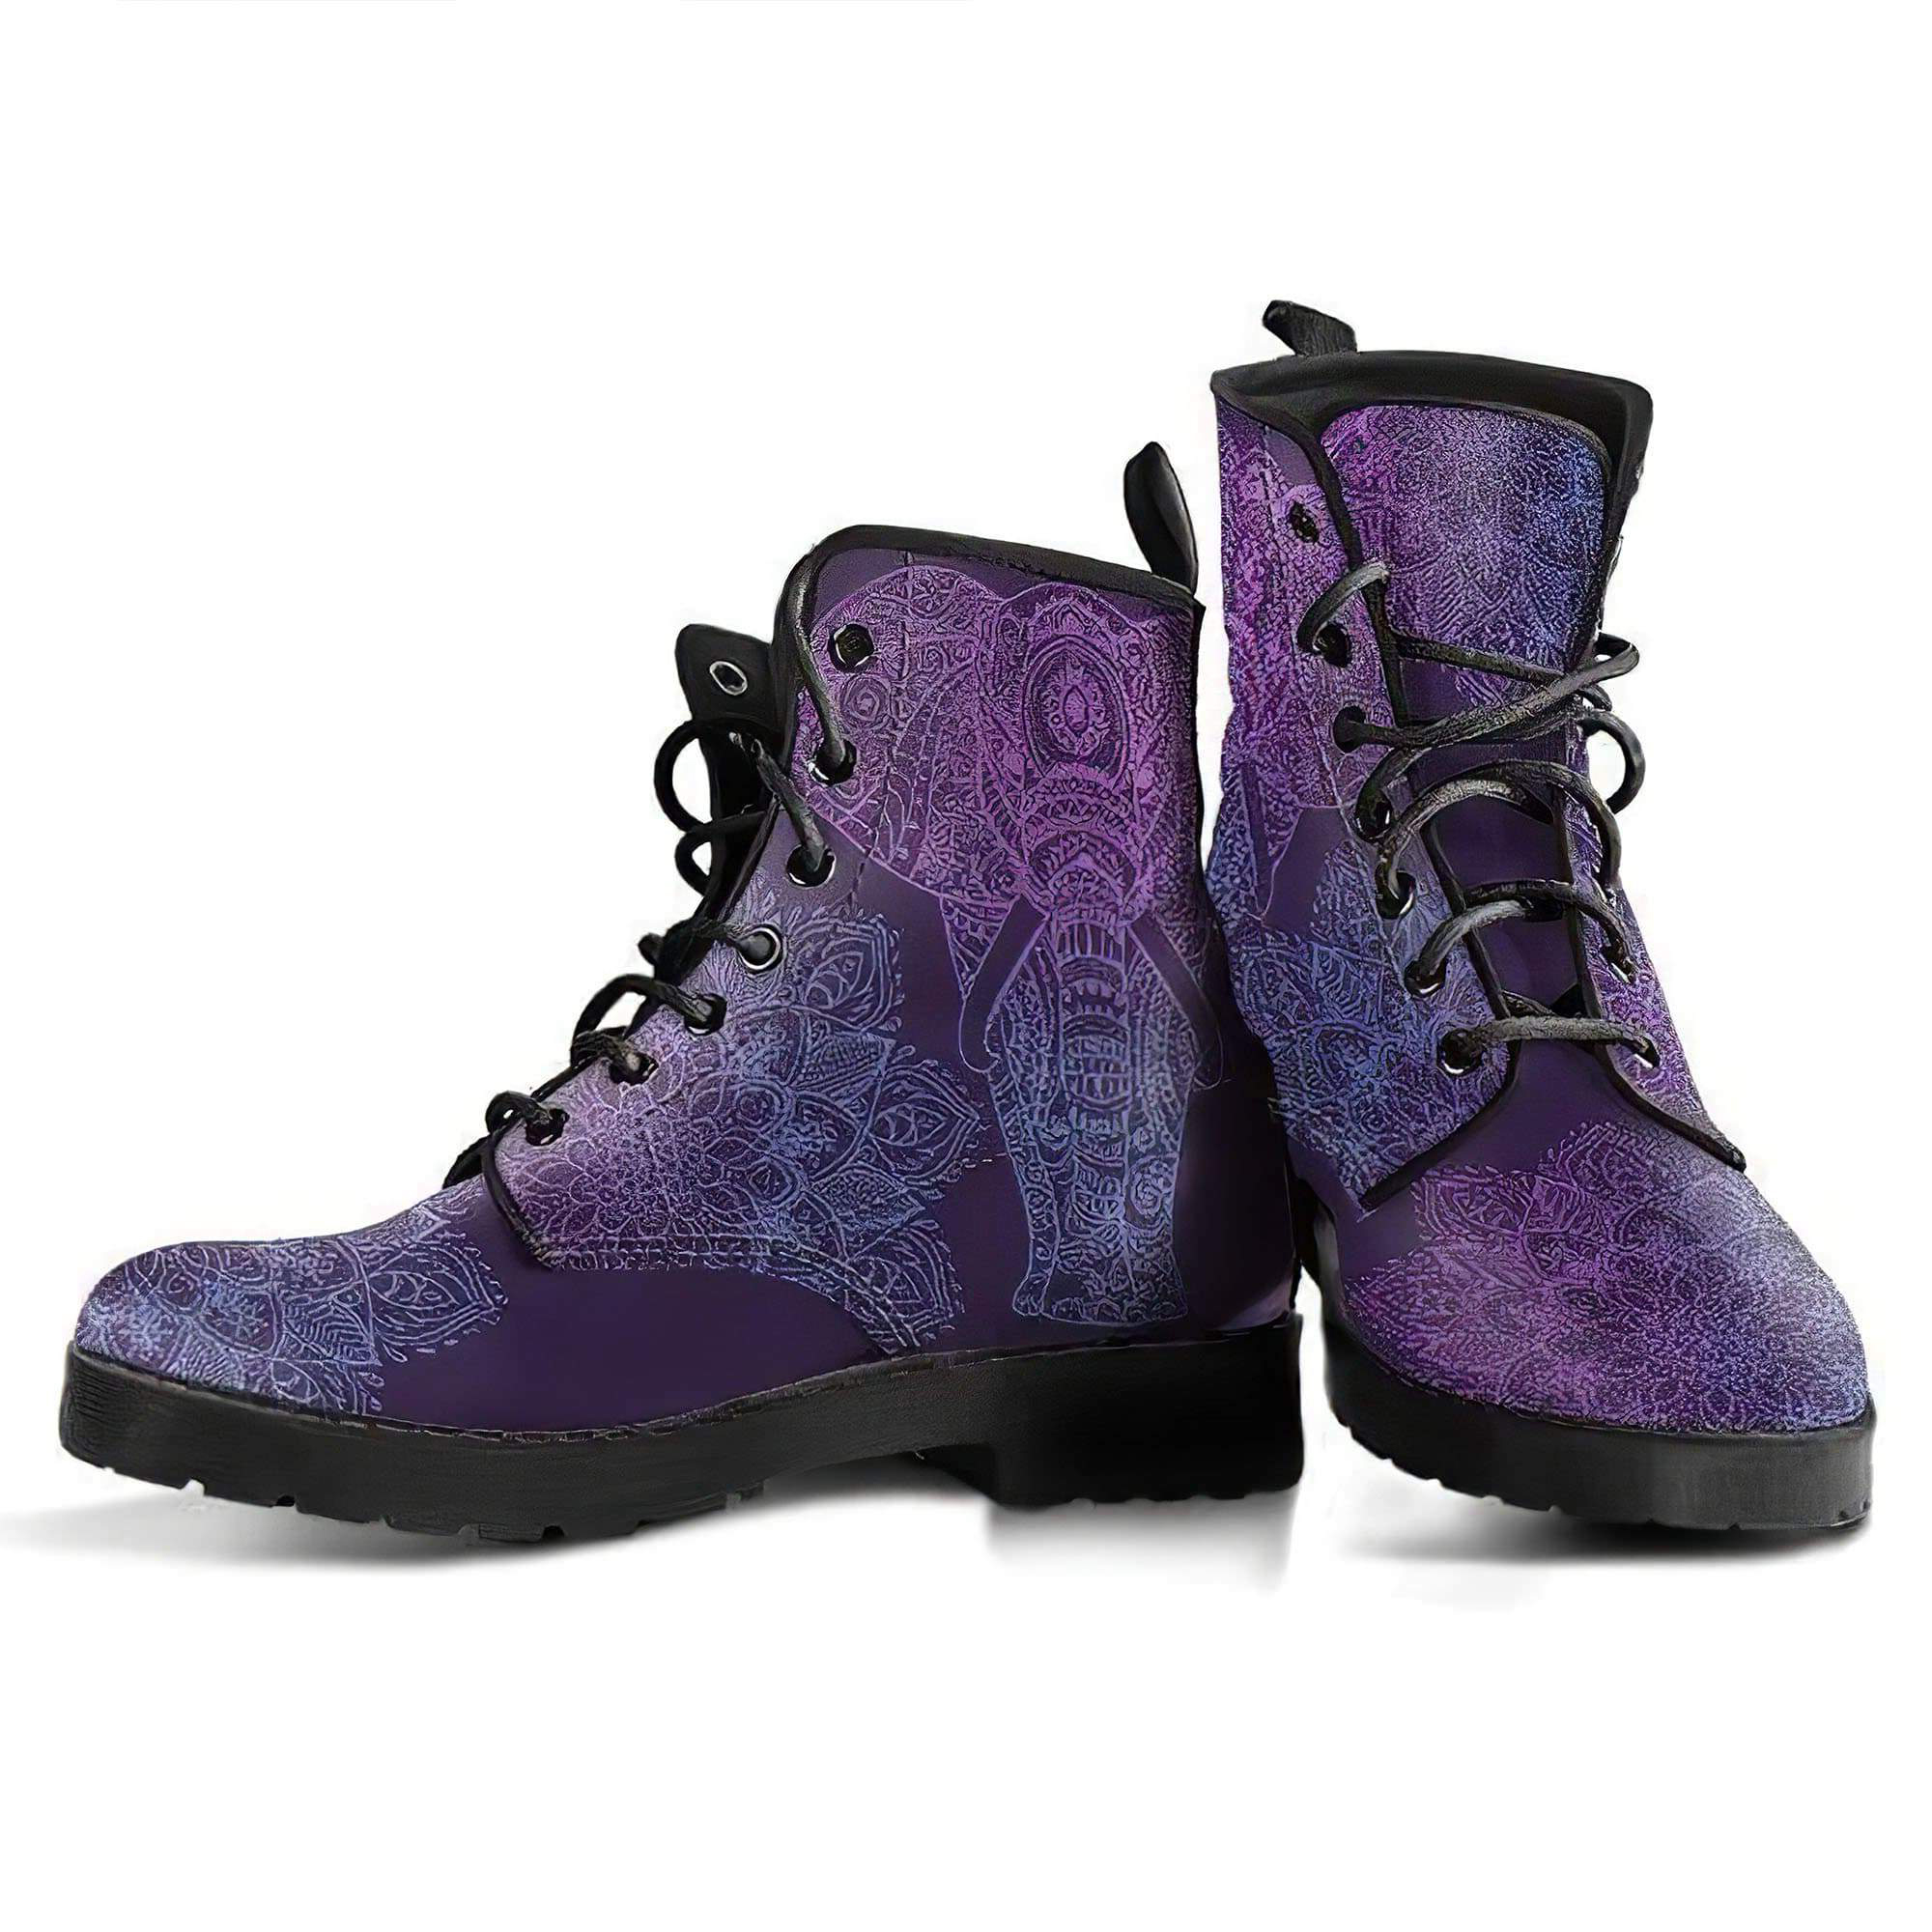 purple-elephant-handcrafted-boots-women-s-leather-boots-12051935526973.jpg